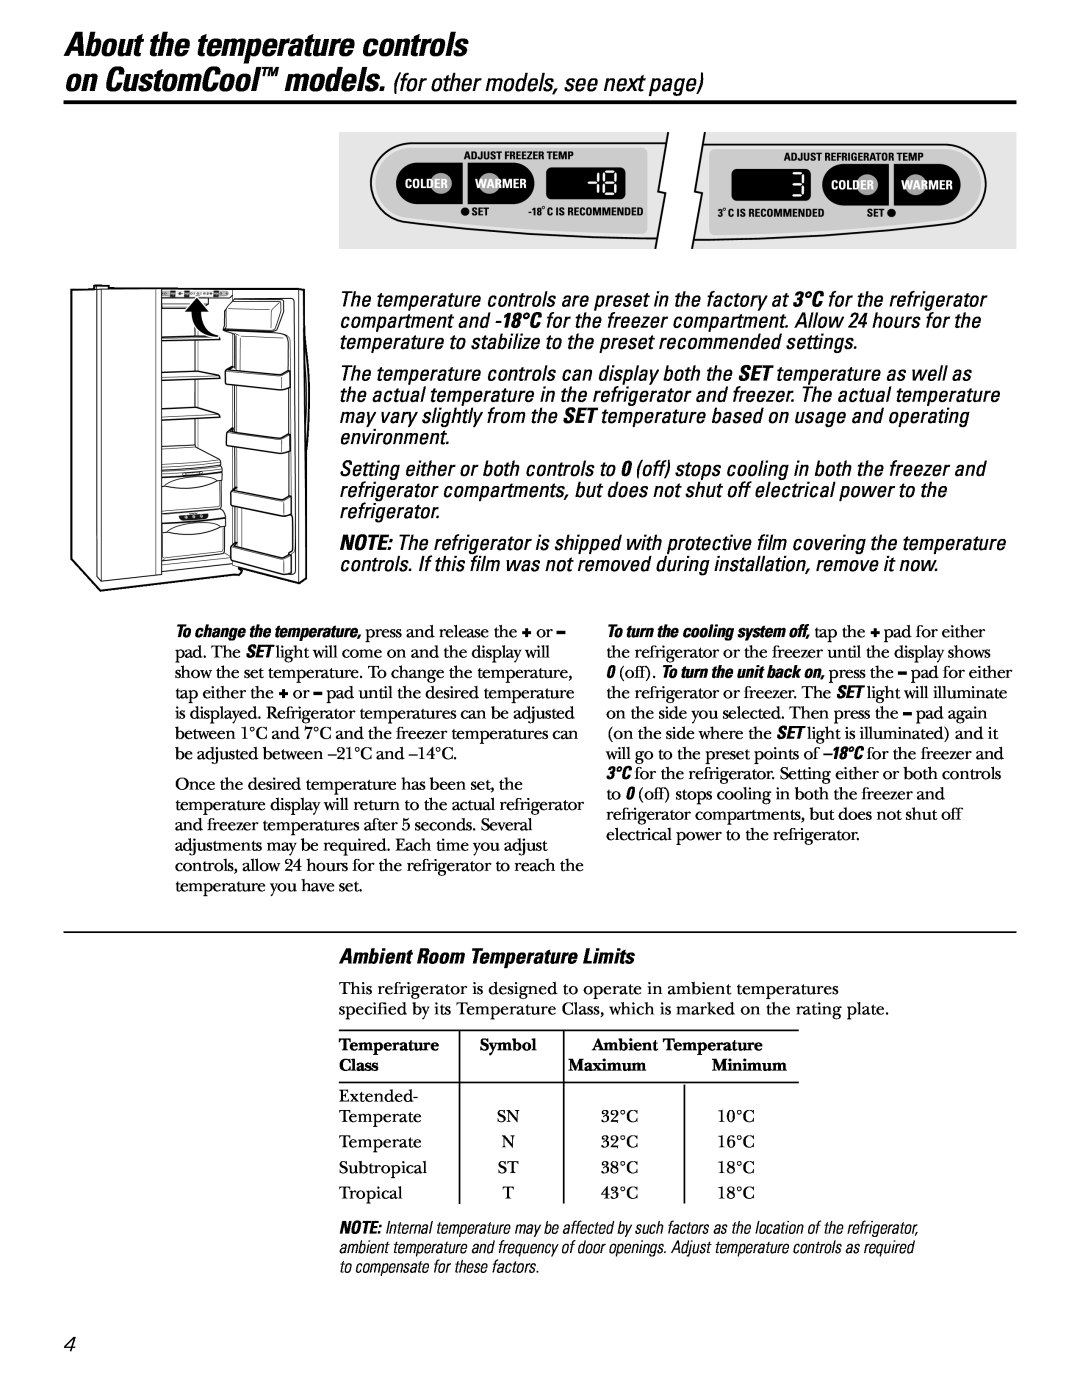 GE 21, 23, 25, 27, 29 About the temperature controls, on CustomCool models. for other models, see next page 